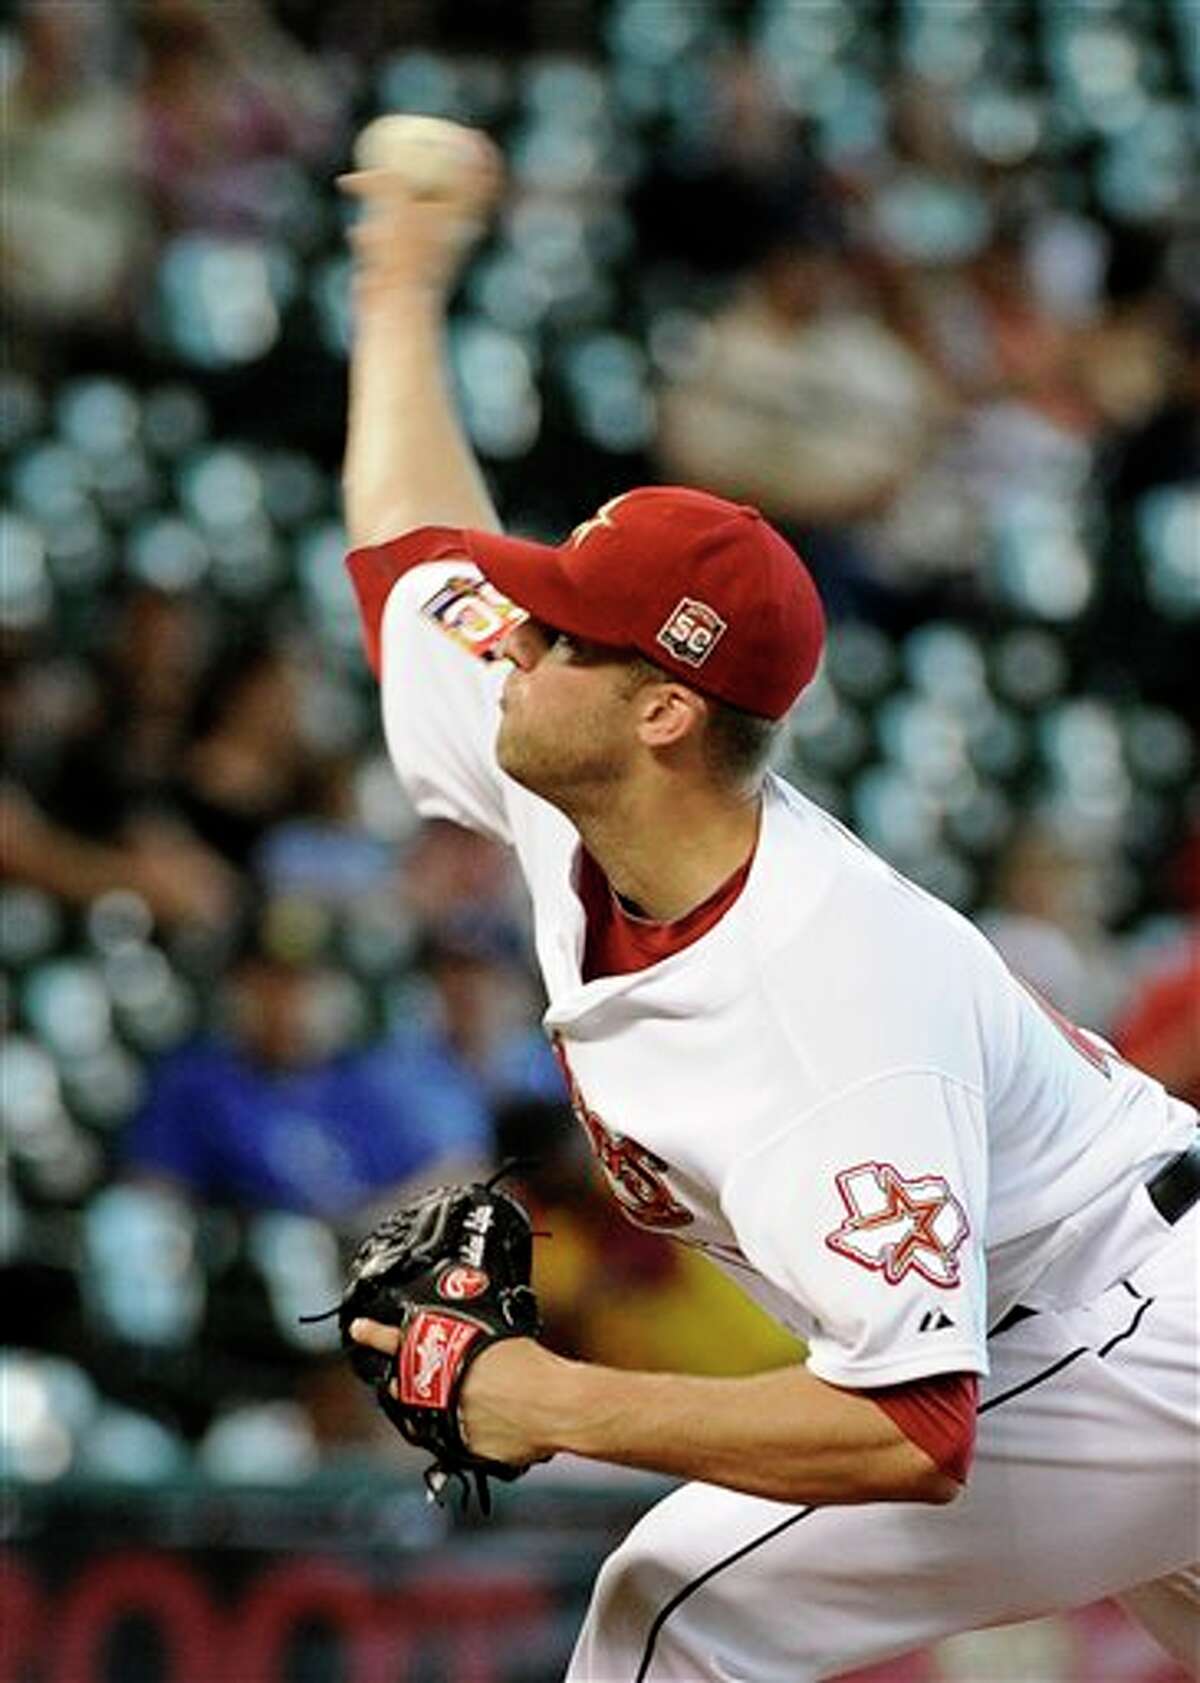 Houston Astros' Jordan Lyles delivers a pitch against the Kansas City Royals in the second inning of a baseball game Wednesday, June 20, 2012, in Houston. (AP Photo/Pat Sullivan)